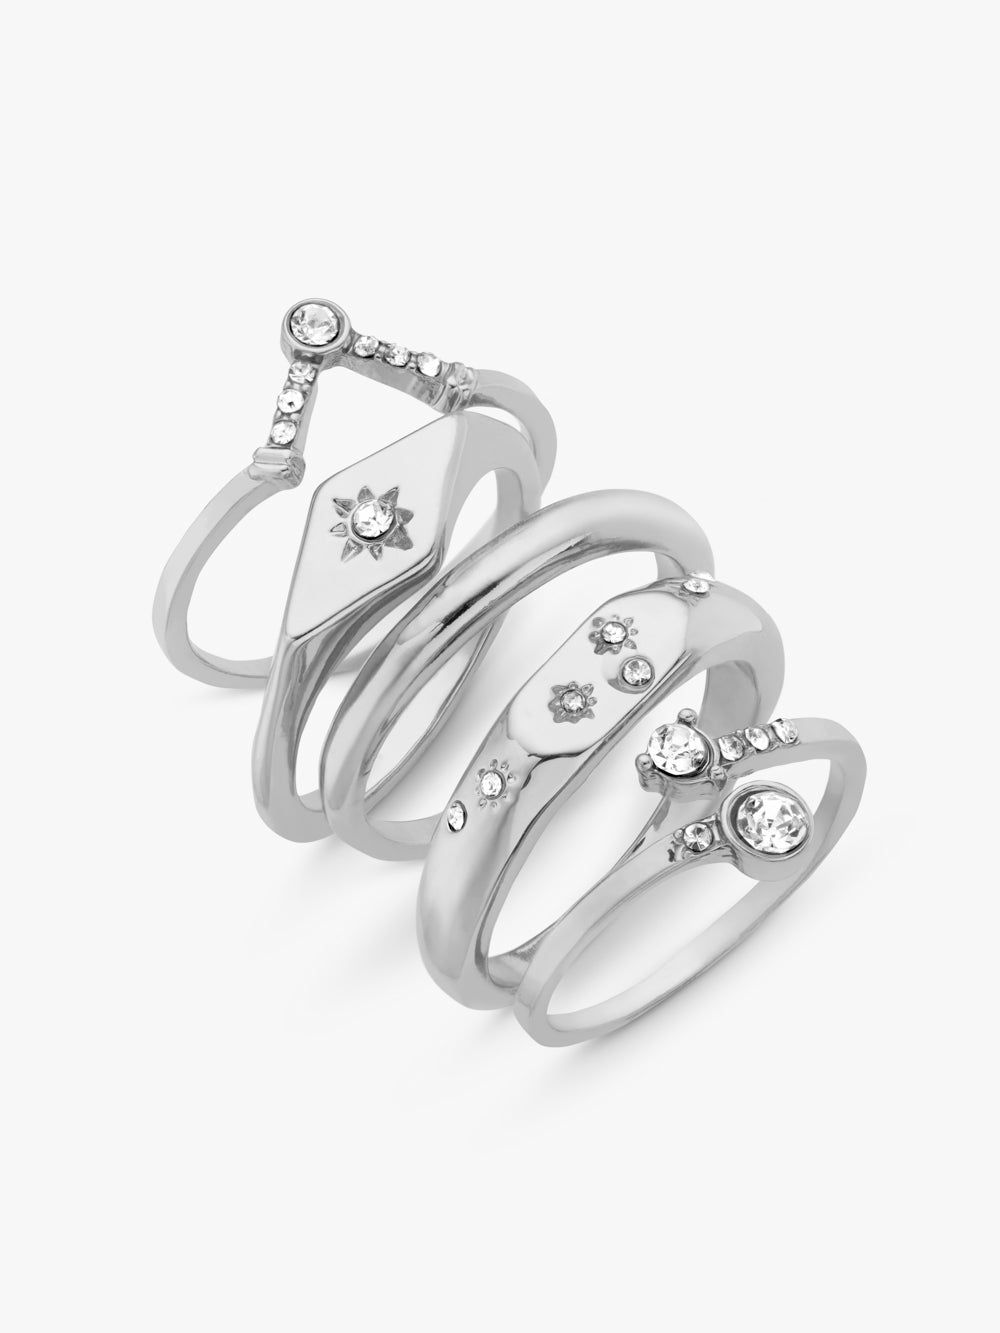 Pack of 5 pretty diamante detail rings in silver finish